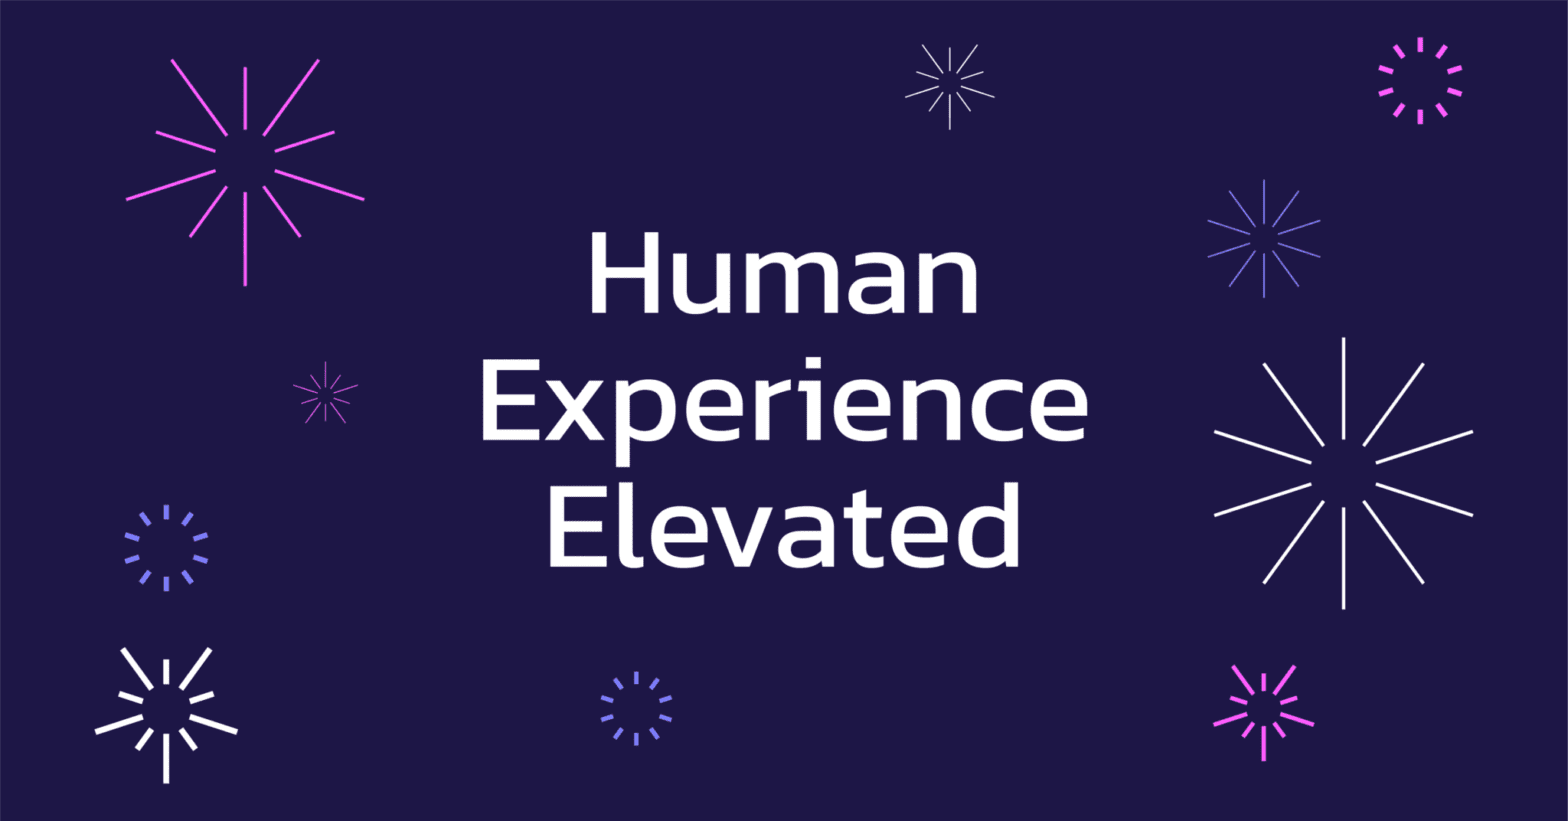 Human experience elevated graphic